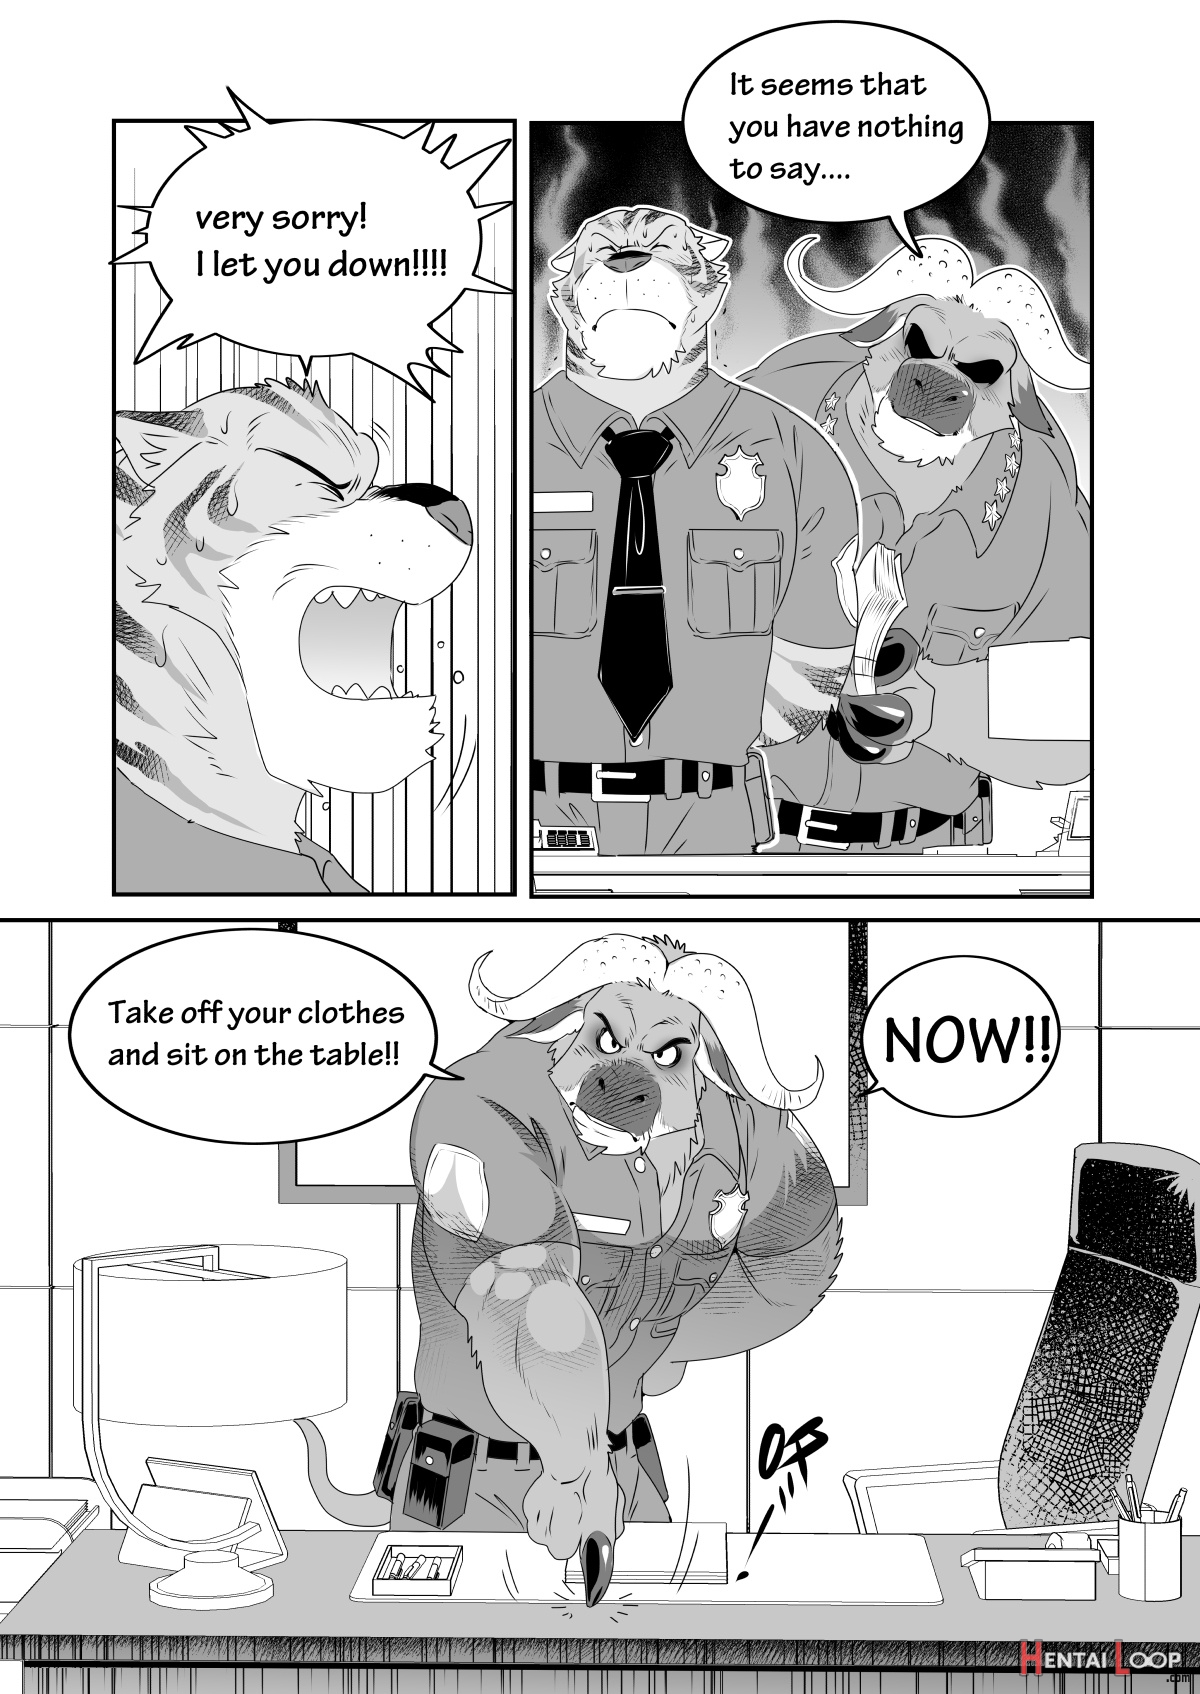 Chief Bogo Found A Dirty Police page 3